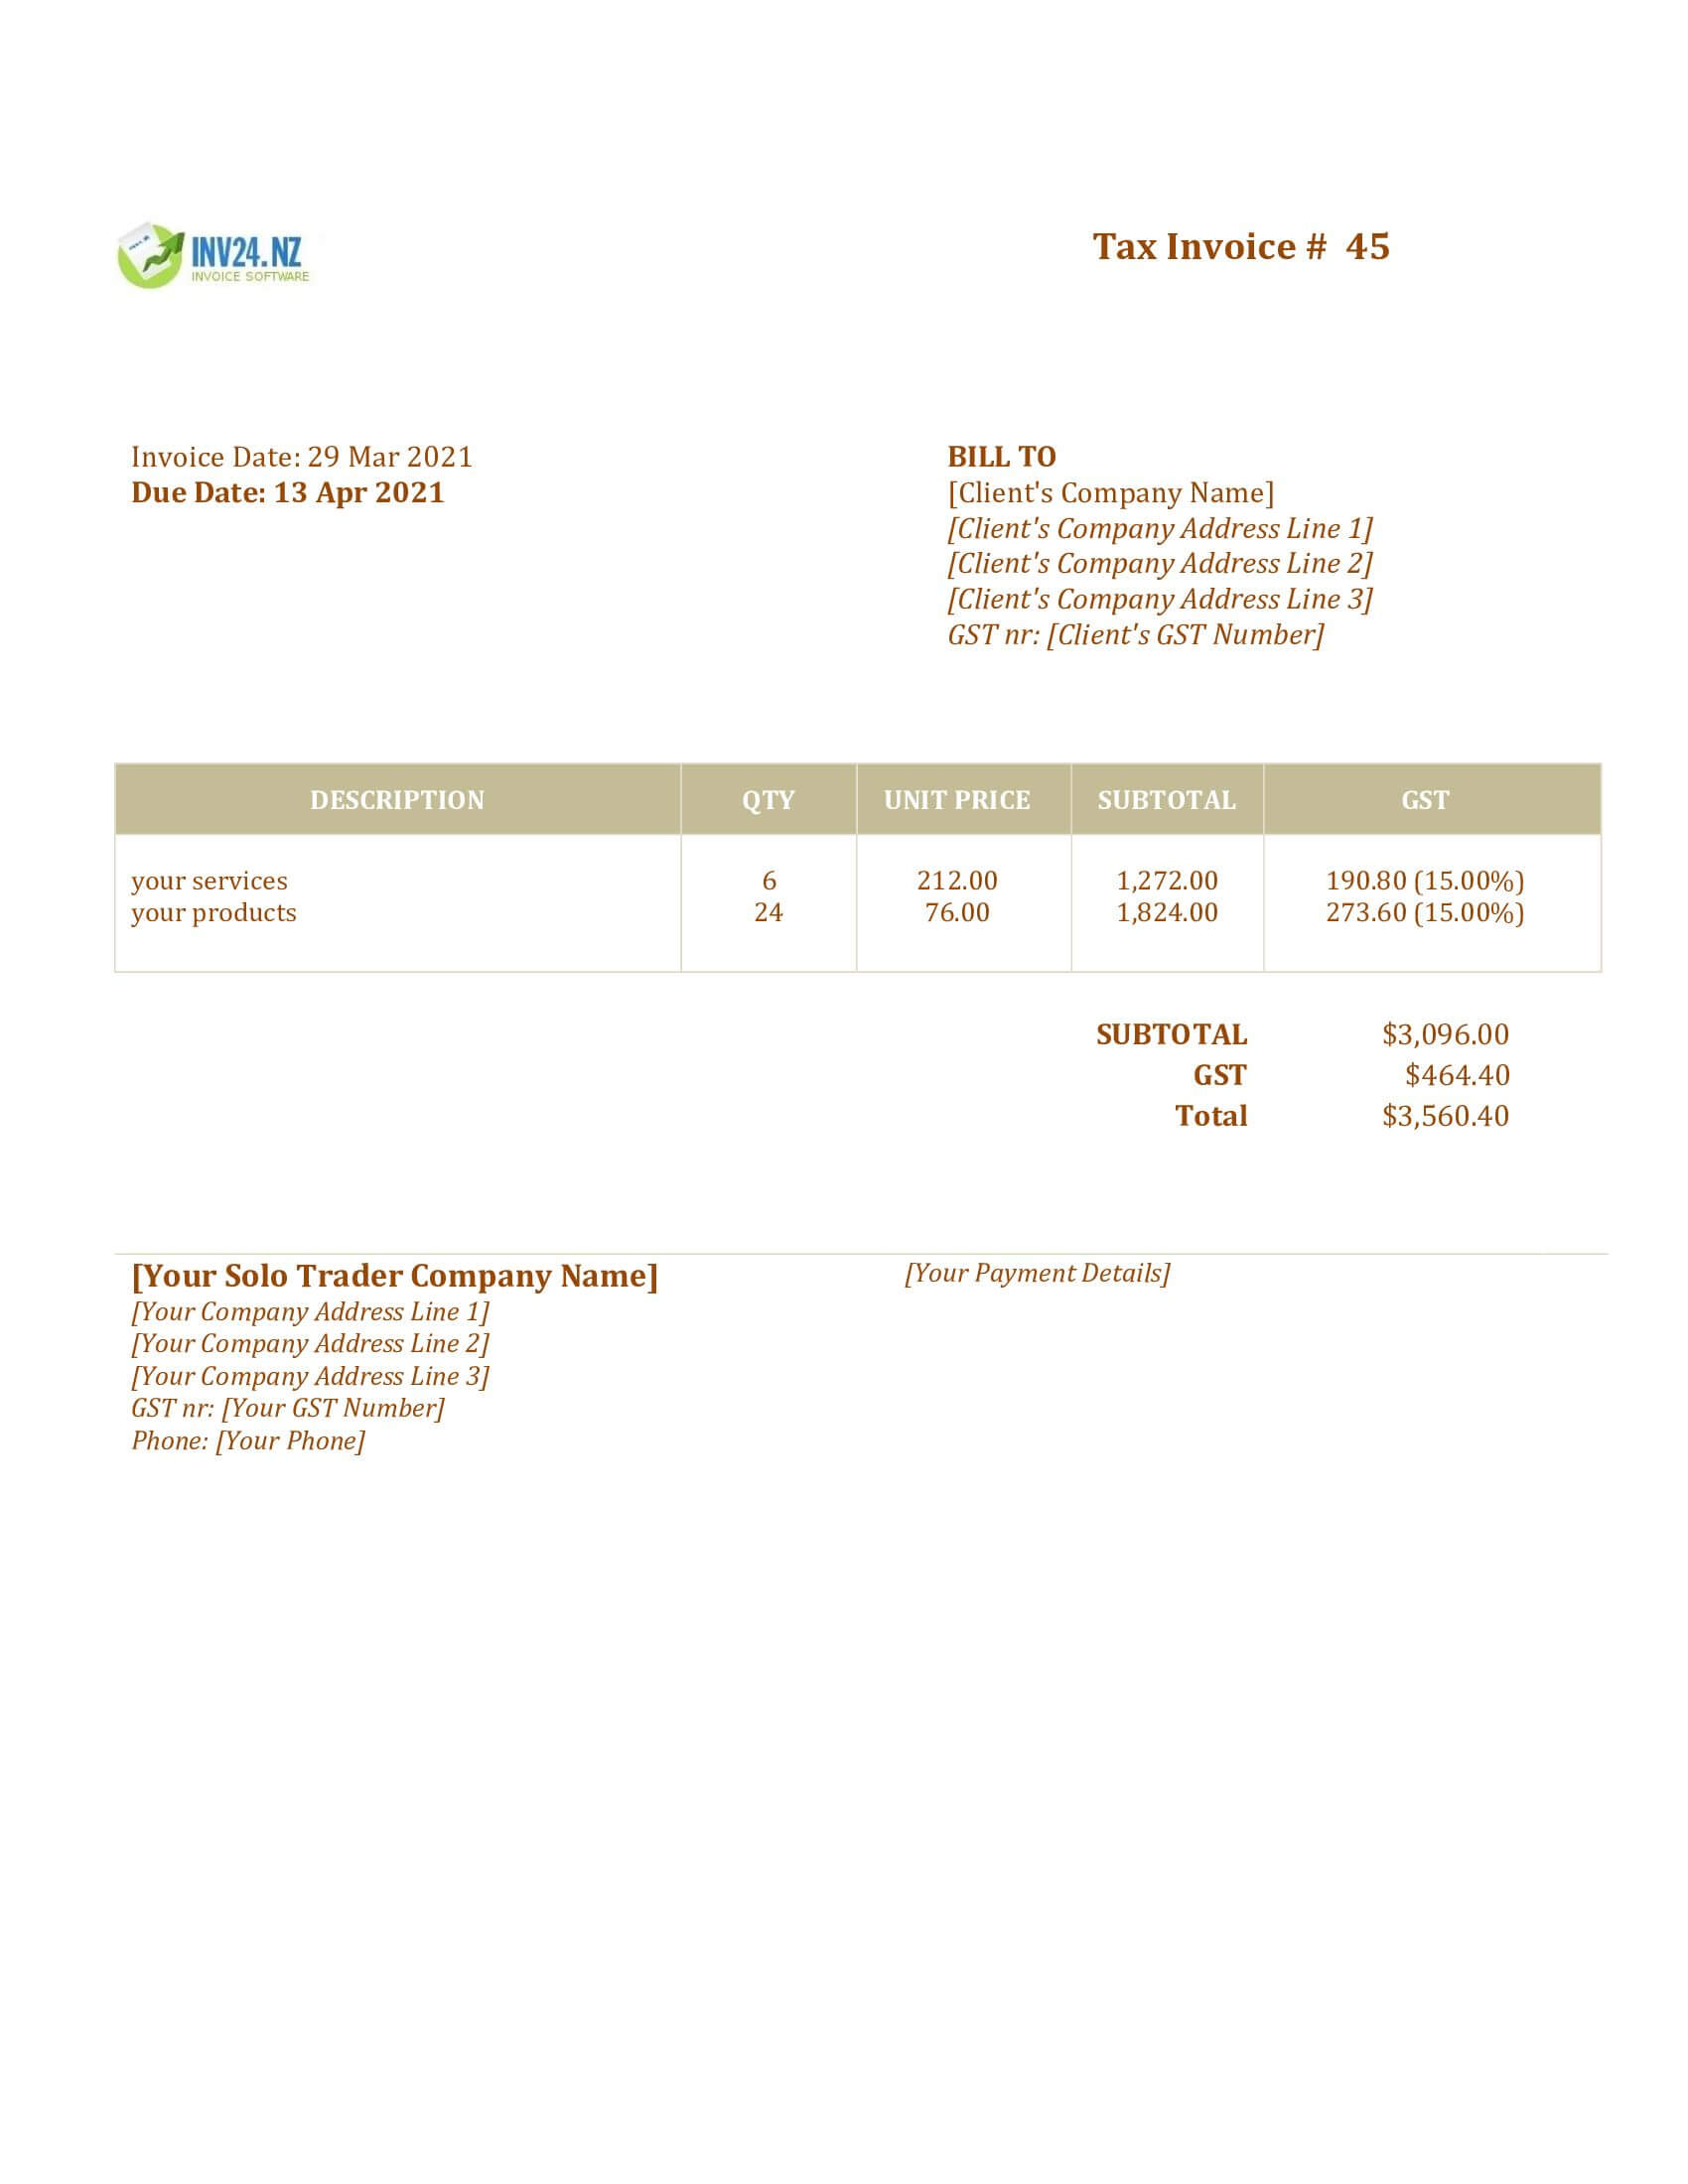 sole trader invoice template nz